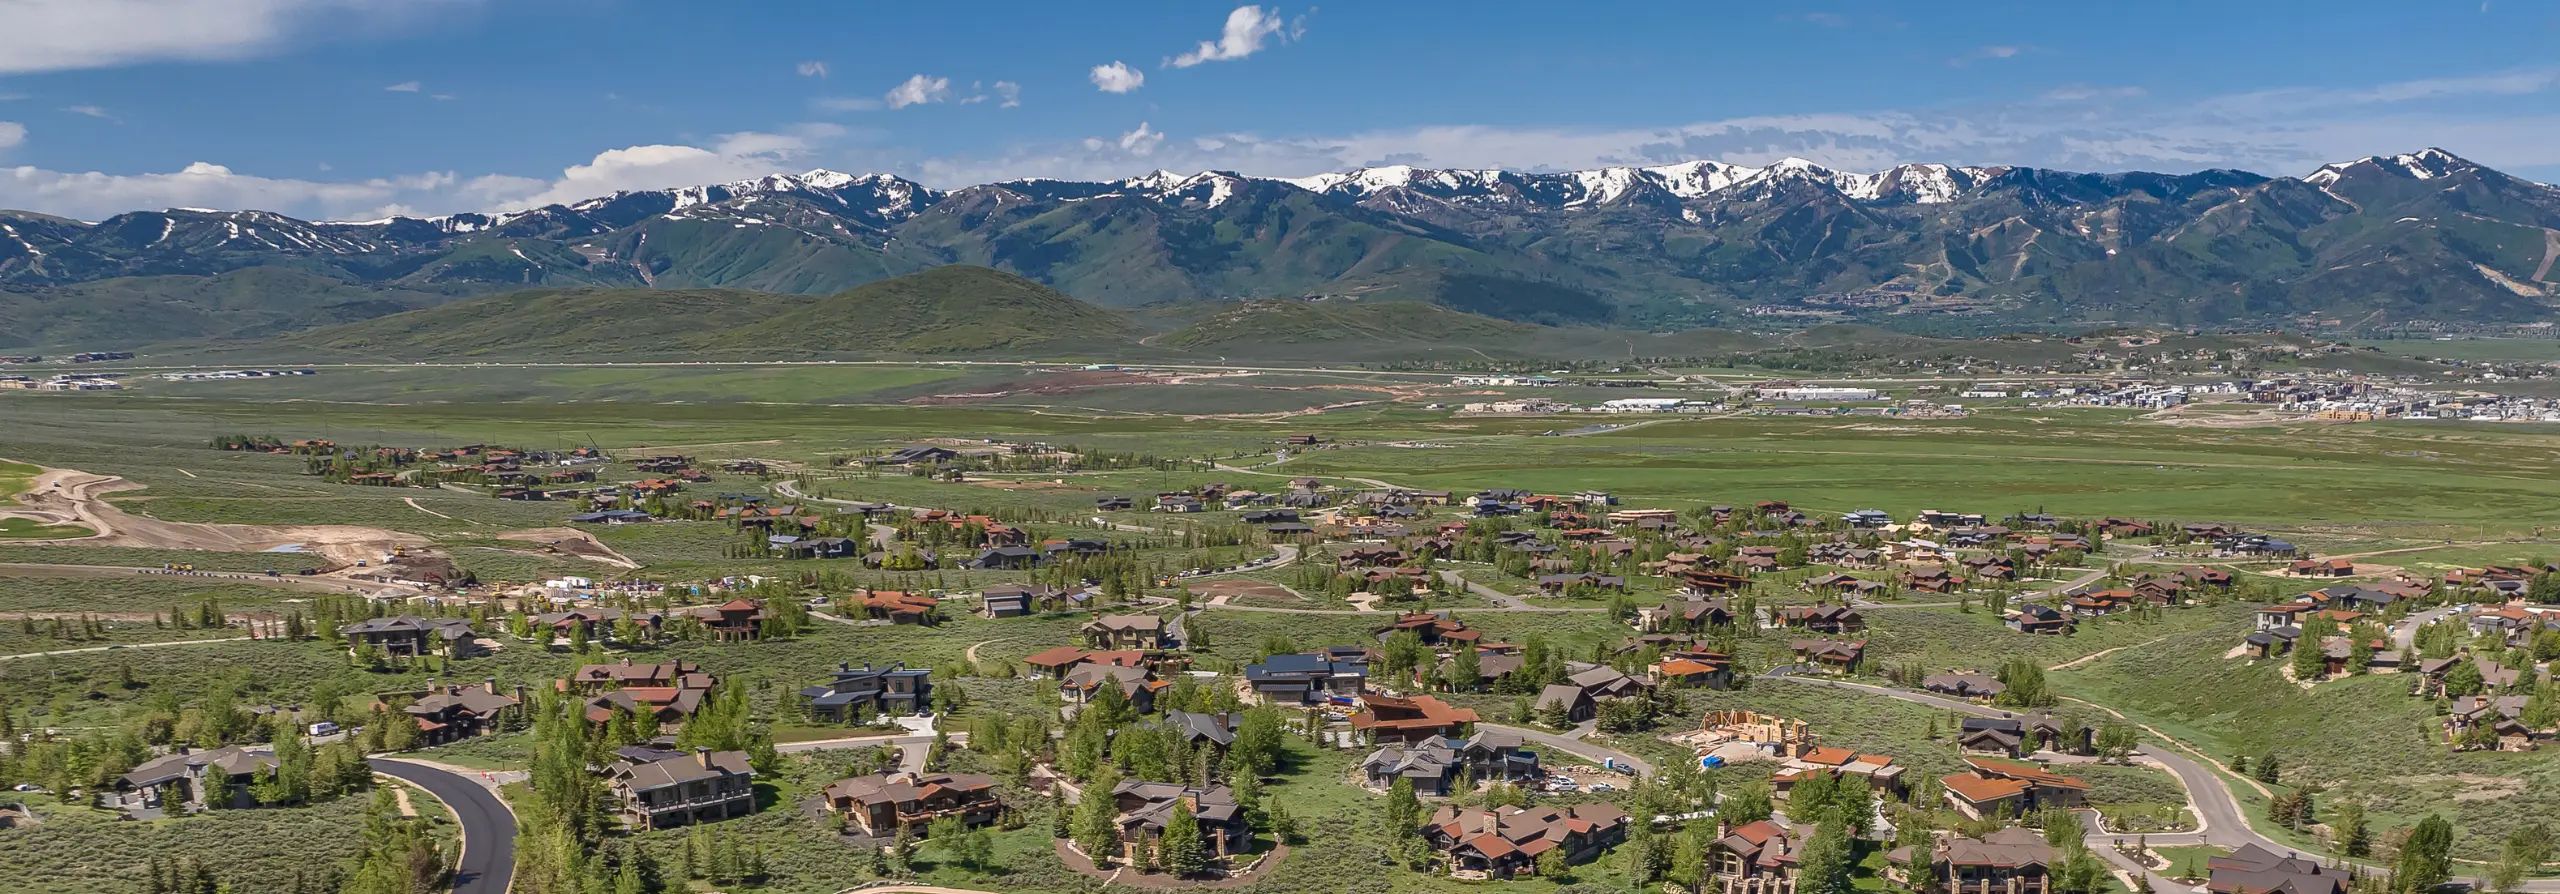 Promontory Real Estate for Sale in Park City, Utah